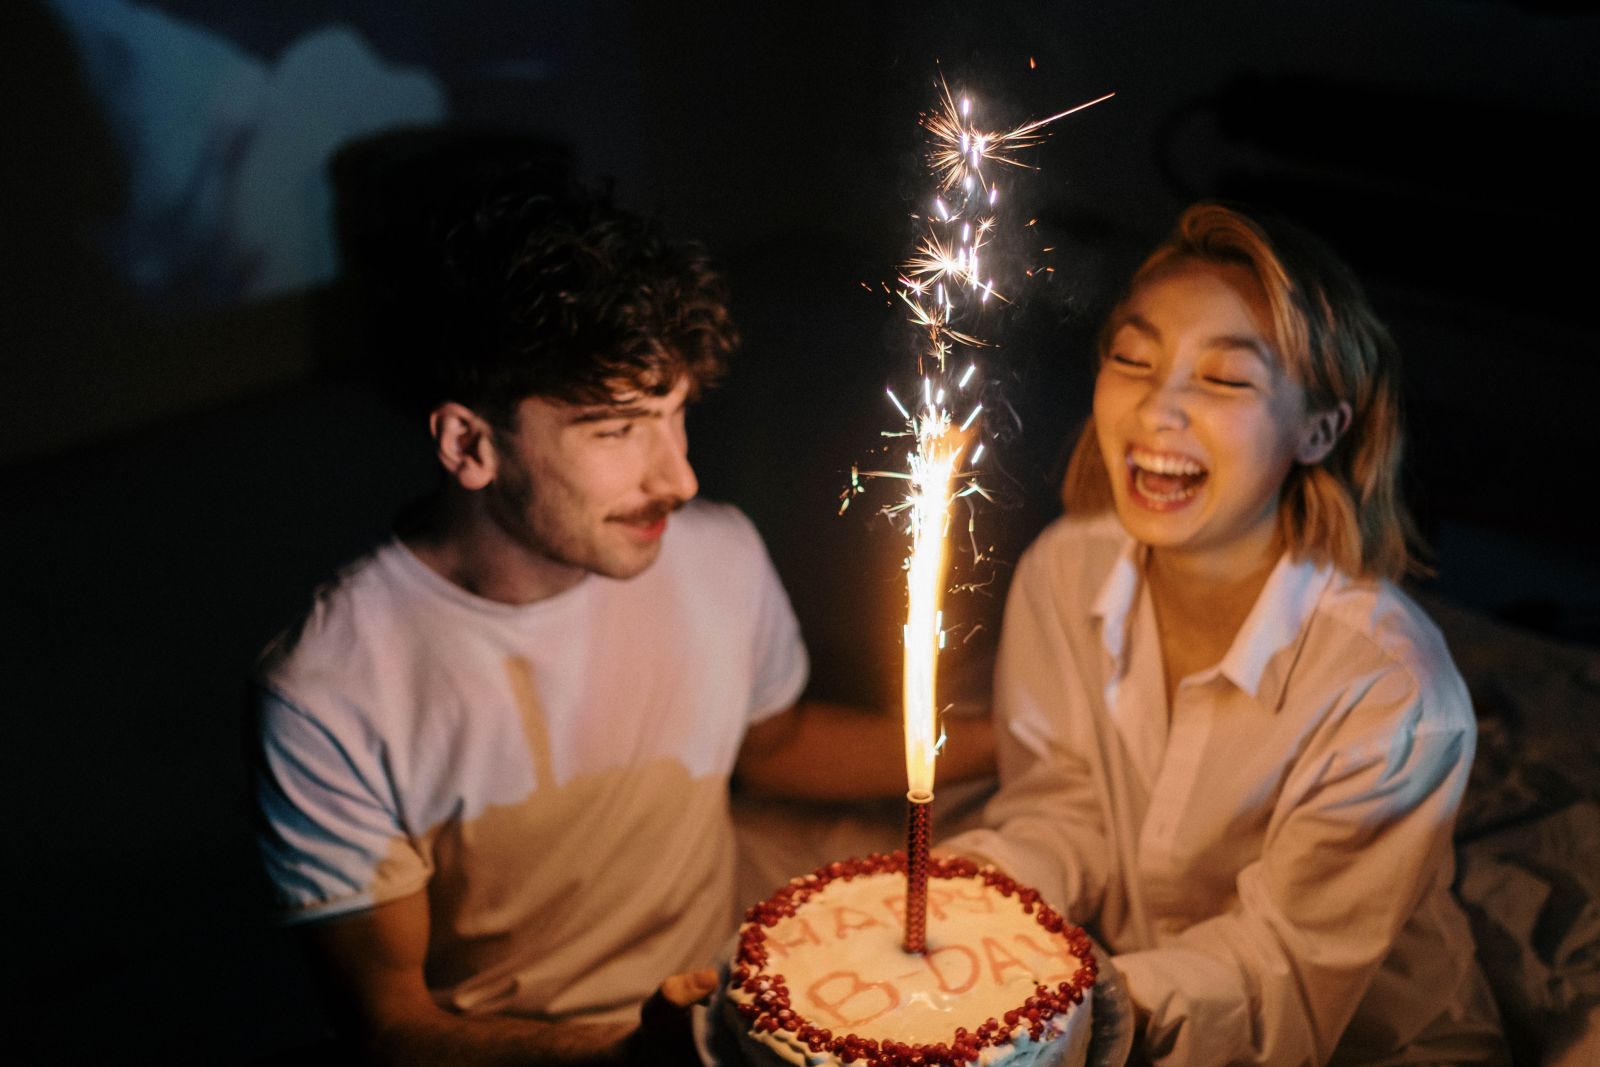 15 Fun and Romantic Birthday Ideas to Make Your Girlfriend Feel Special